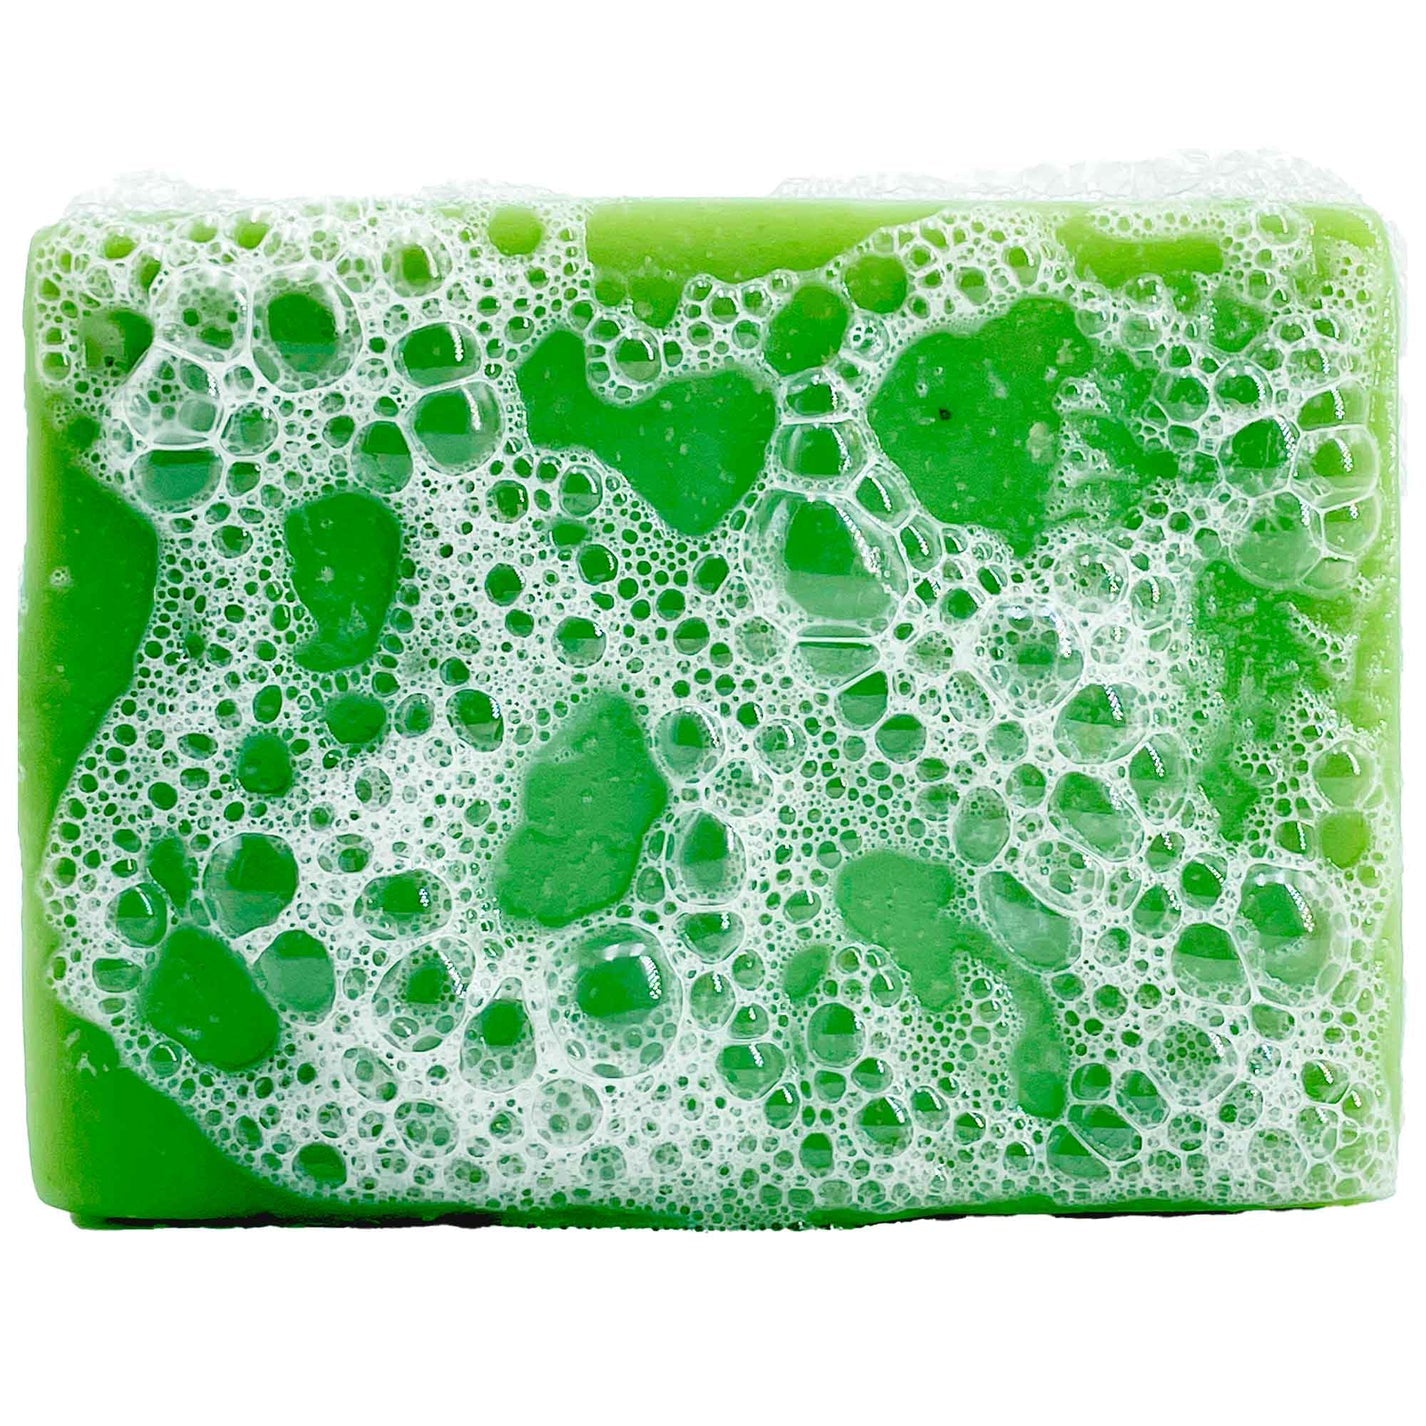 Solid Soap Aloe Relax 100G 